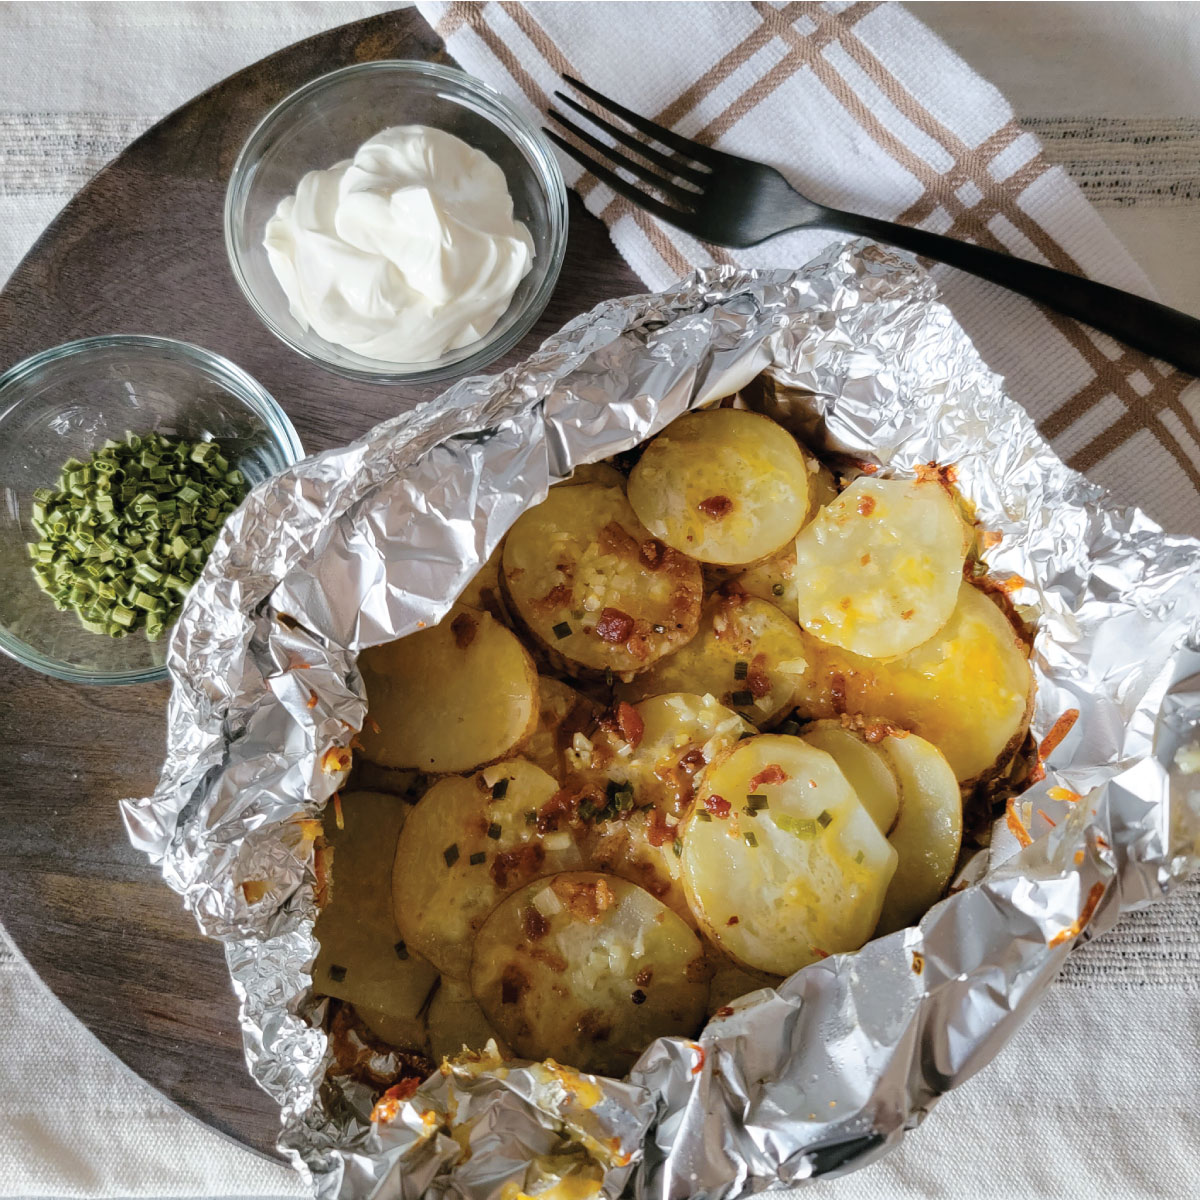 potatoes topped with cheese, bacon, chives and butter in a foil pack ready to eat